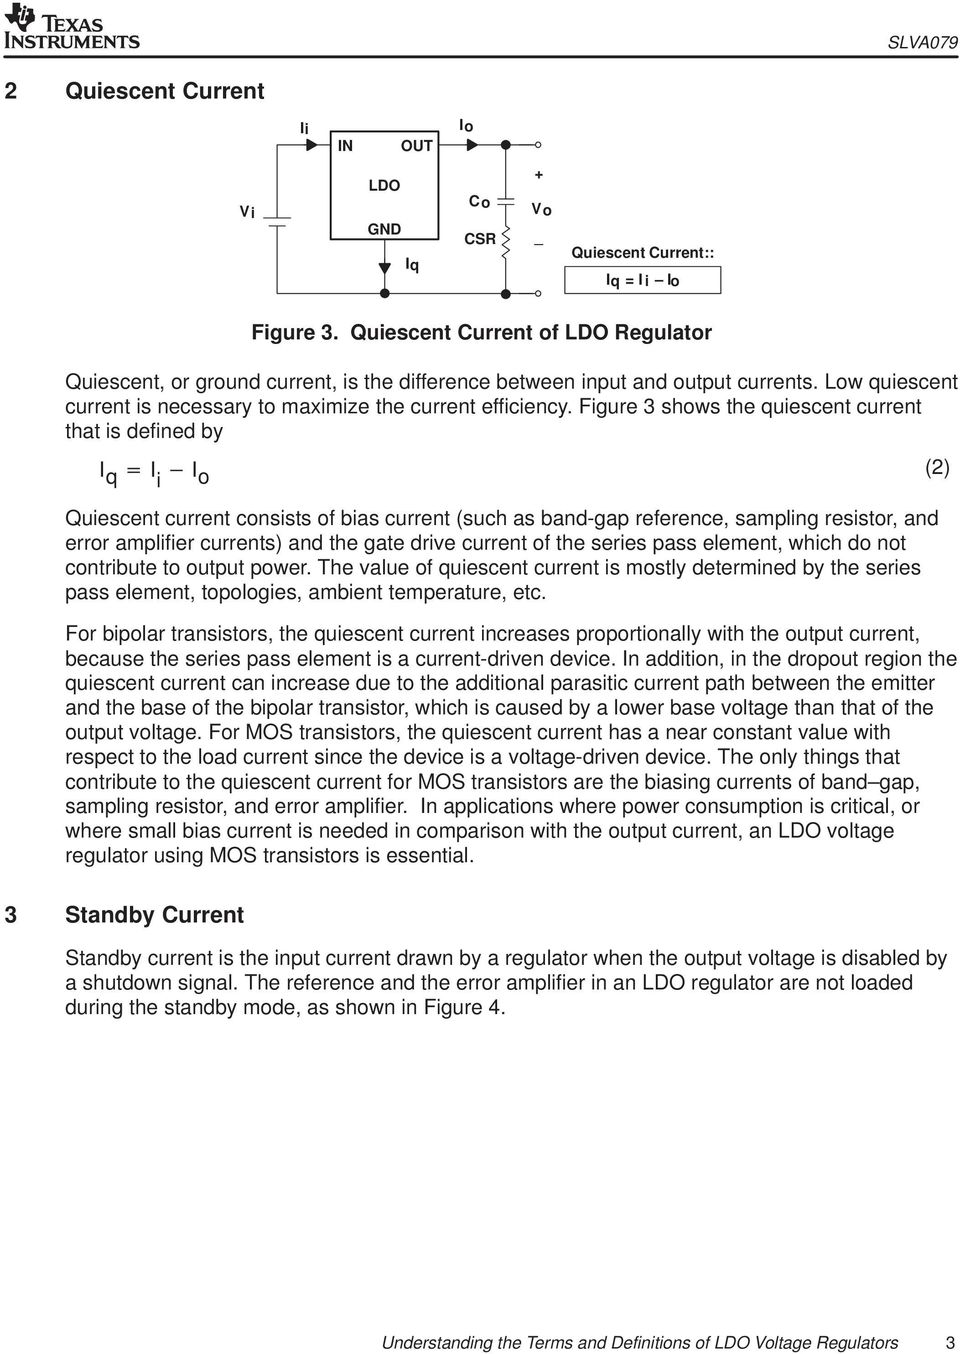 Figure 3 shows the quiescent current that is defined by I q I i I o Quiescent current consists of bias current (such as band-gap reference, sampling resistor, and error amplifier currents) and the